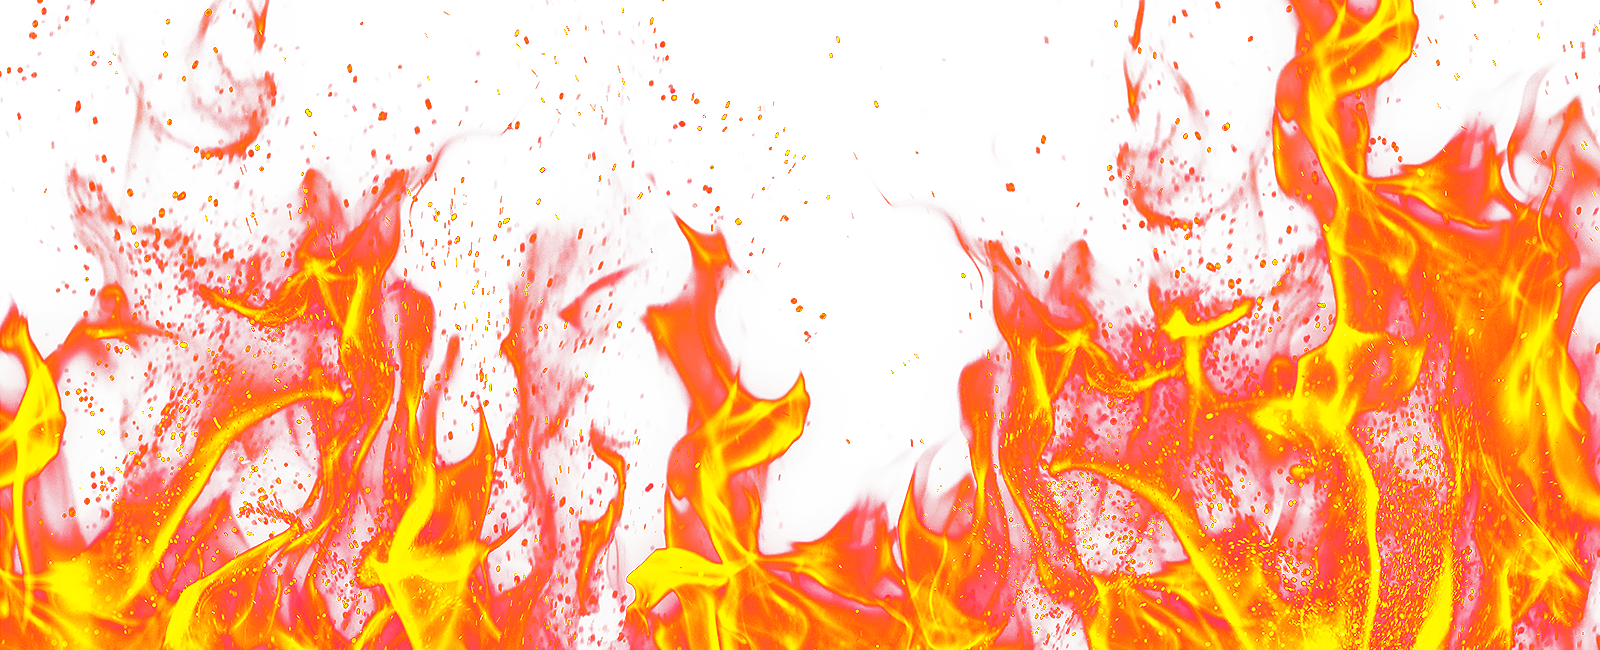 fire_PNG6032.png